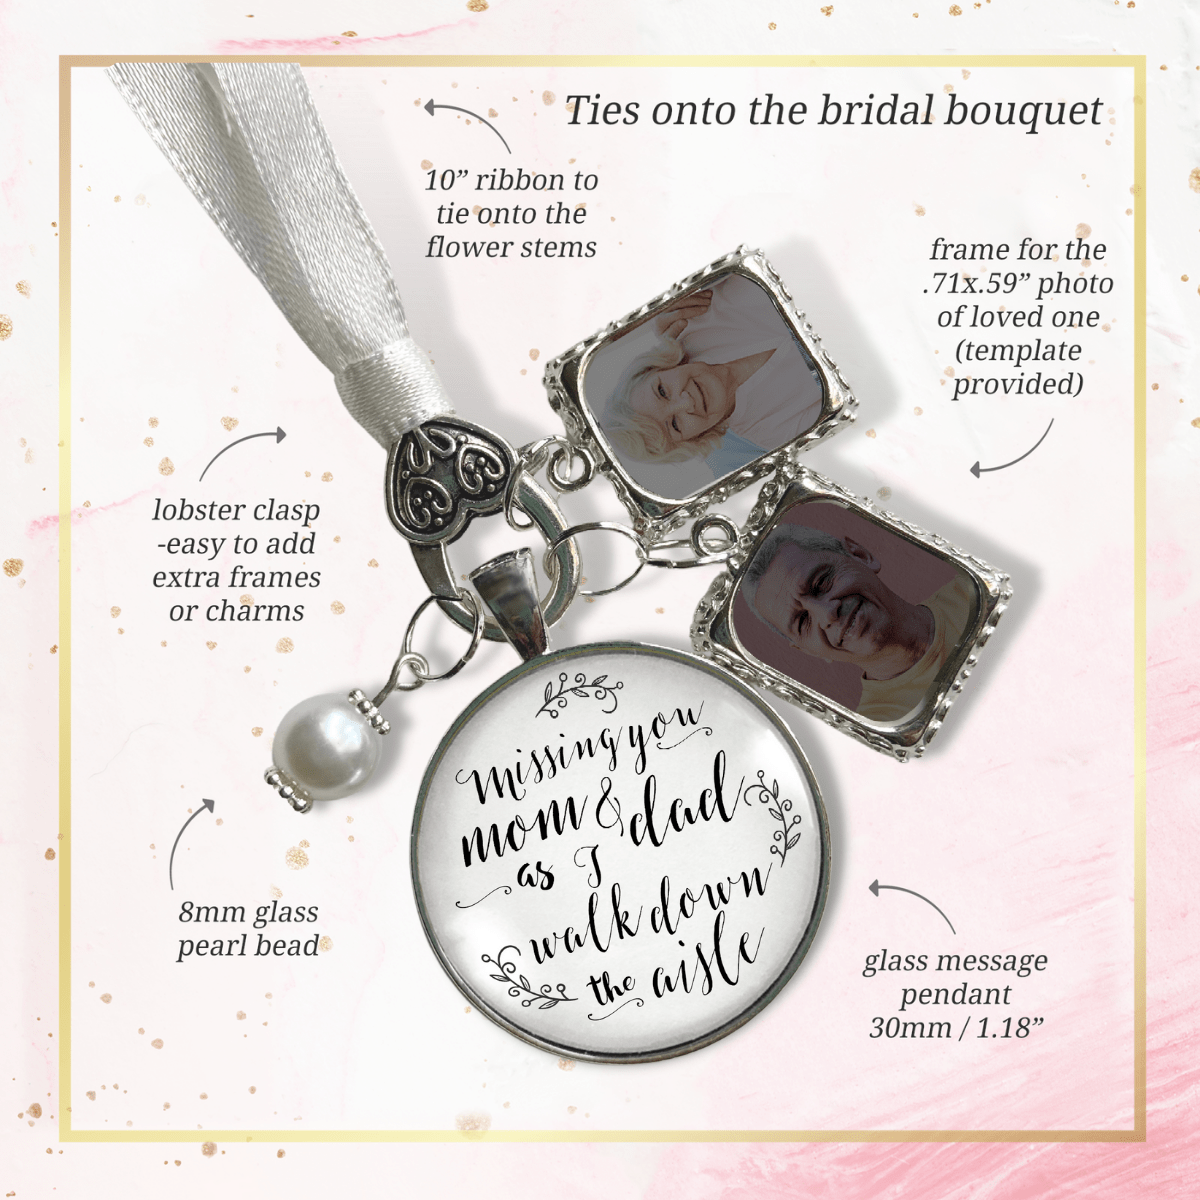 Bouquet Charm Mom Dad Parents Of Bride Wedding White Silver Tone Memory 2 Photo Frame - Gutsy Goodness Handmade Jewelry Gifts